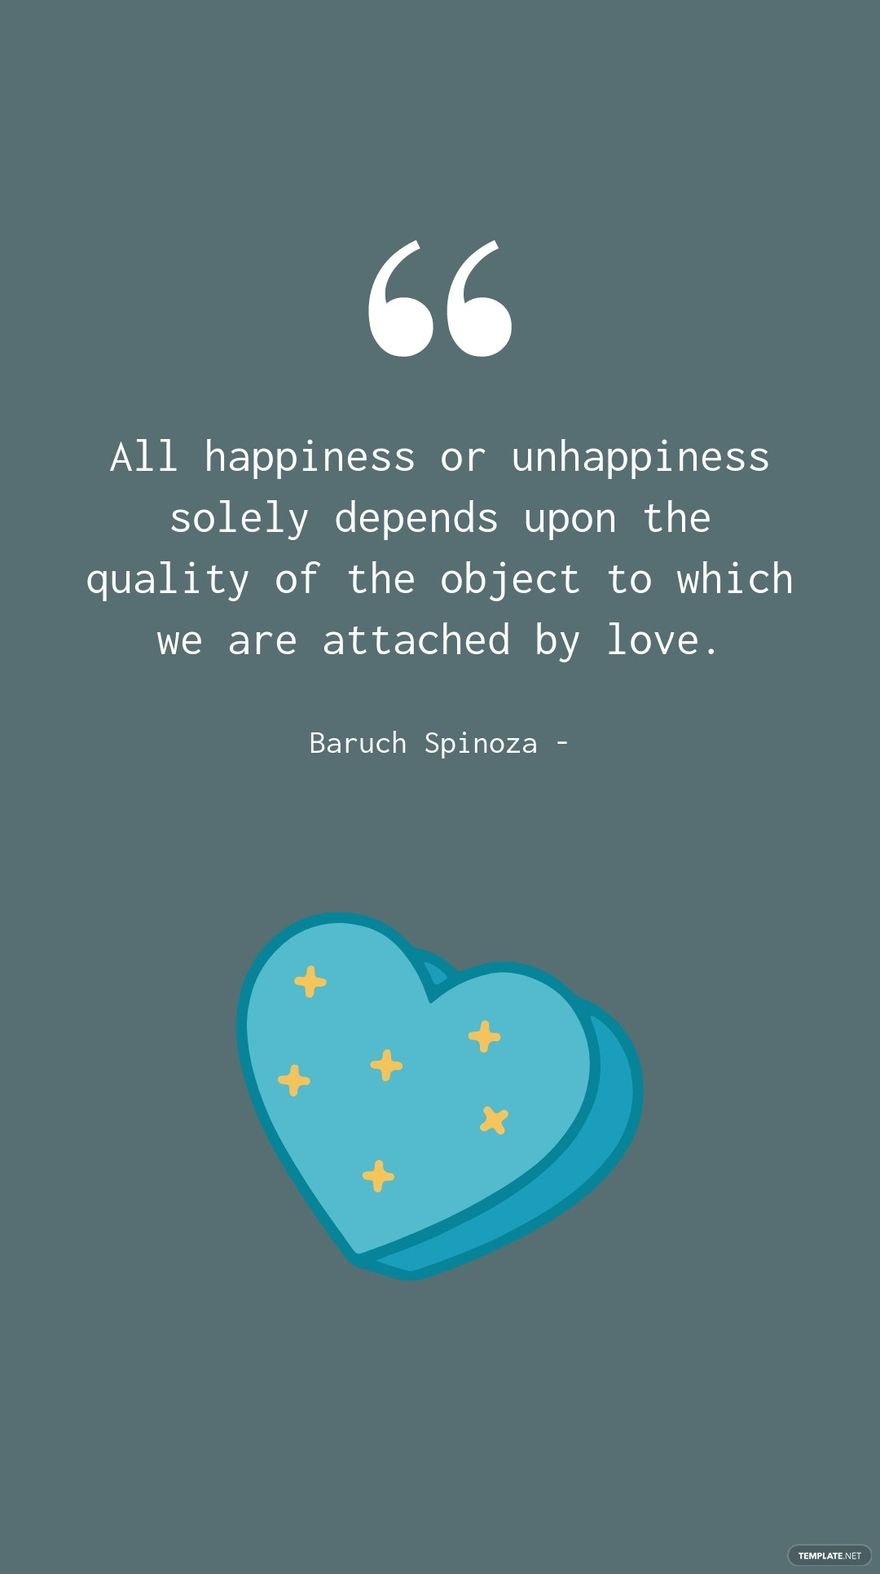 Free Baruch Spinoza - All happiness or unhappiness solely depends upon the quality of the object to which we are attached by love.